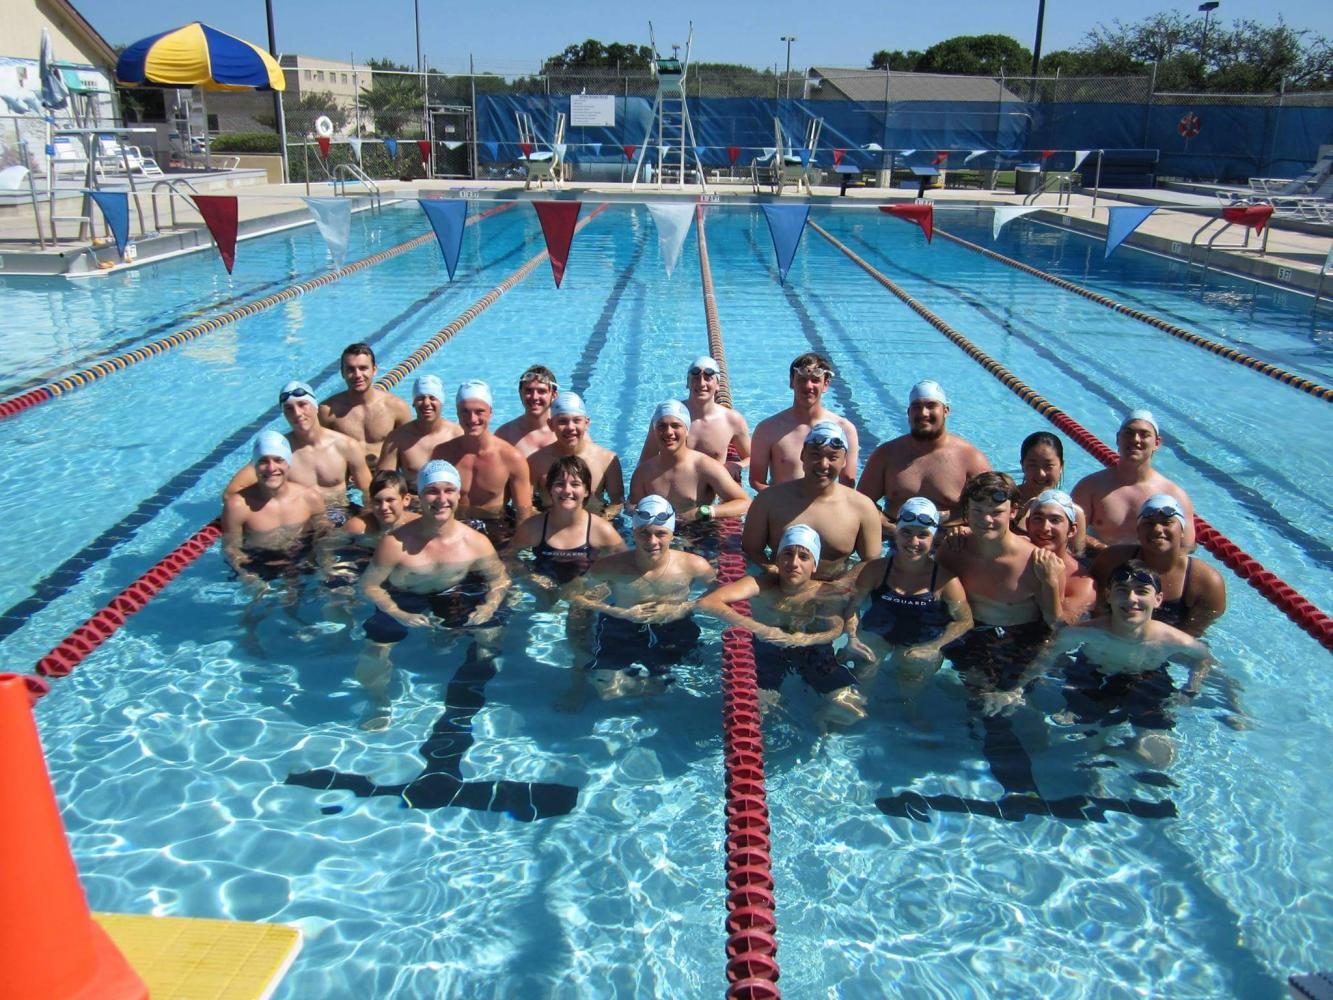 Lifeguards+at+El+Salido+Pool+gather+for+a+picture+after+swimming+20+laps+for+Swim+Across+Texas.+Photo+courtesy+of+El+Salido.